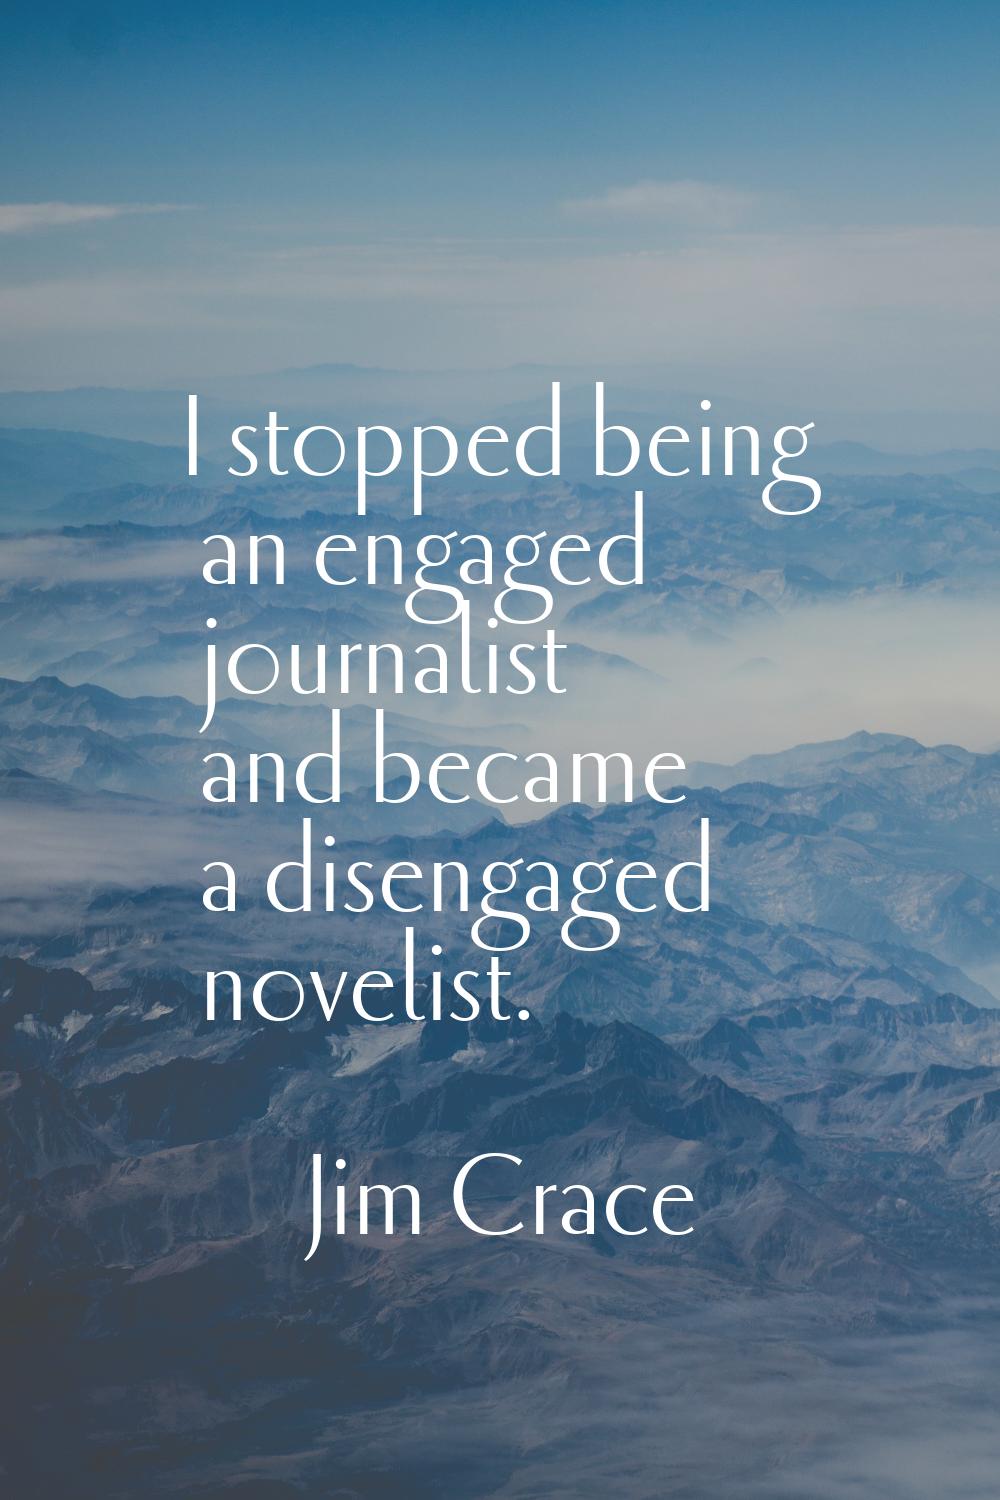 I stopped being an engaged journalist and became a disengaged novelist.